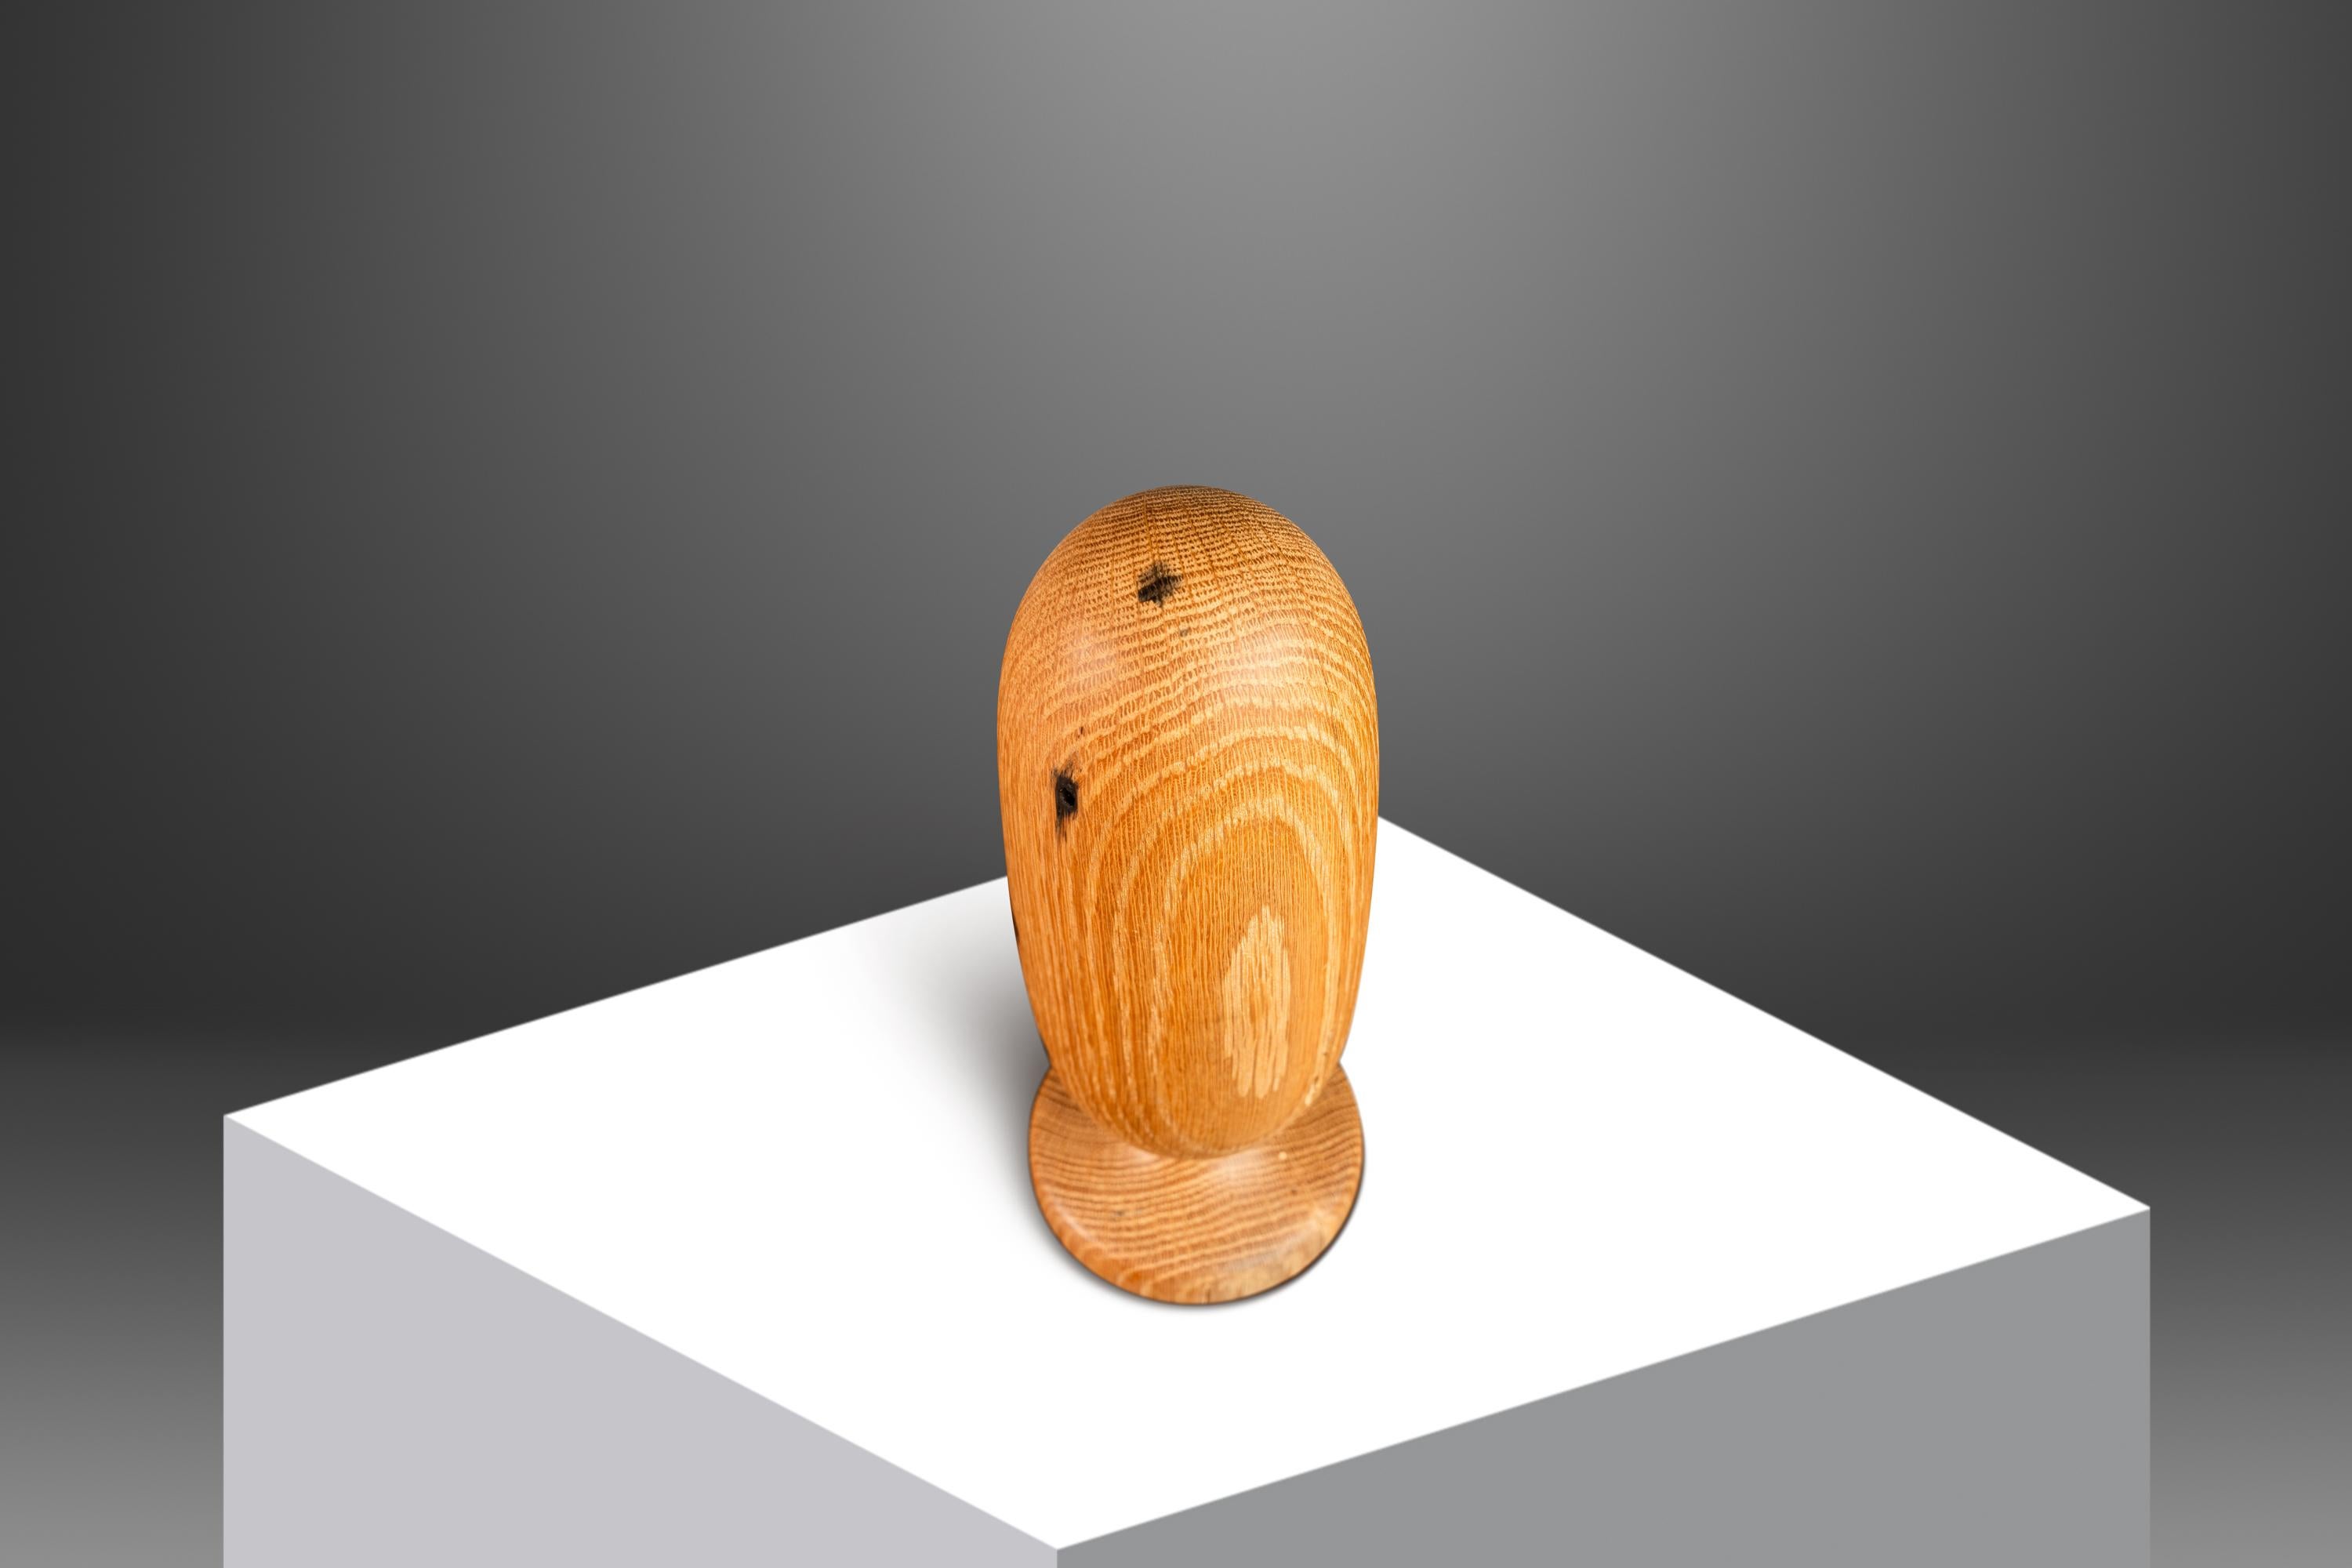 American Organic Modern Sculpture in Solid White Oak by Mark Leblanc, USA, c. 2023 For Sale